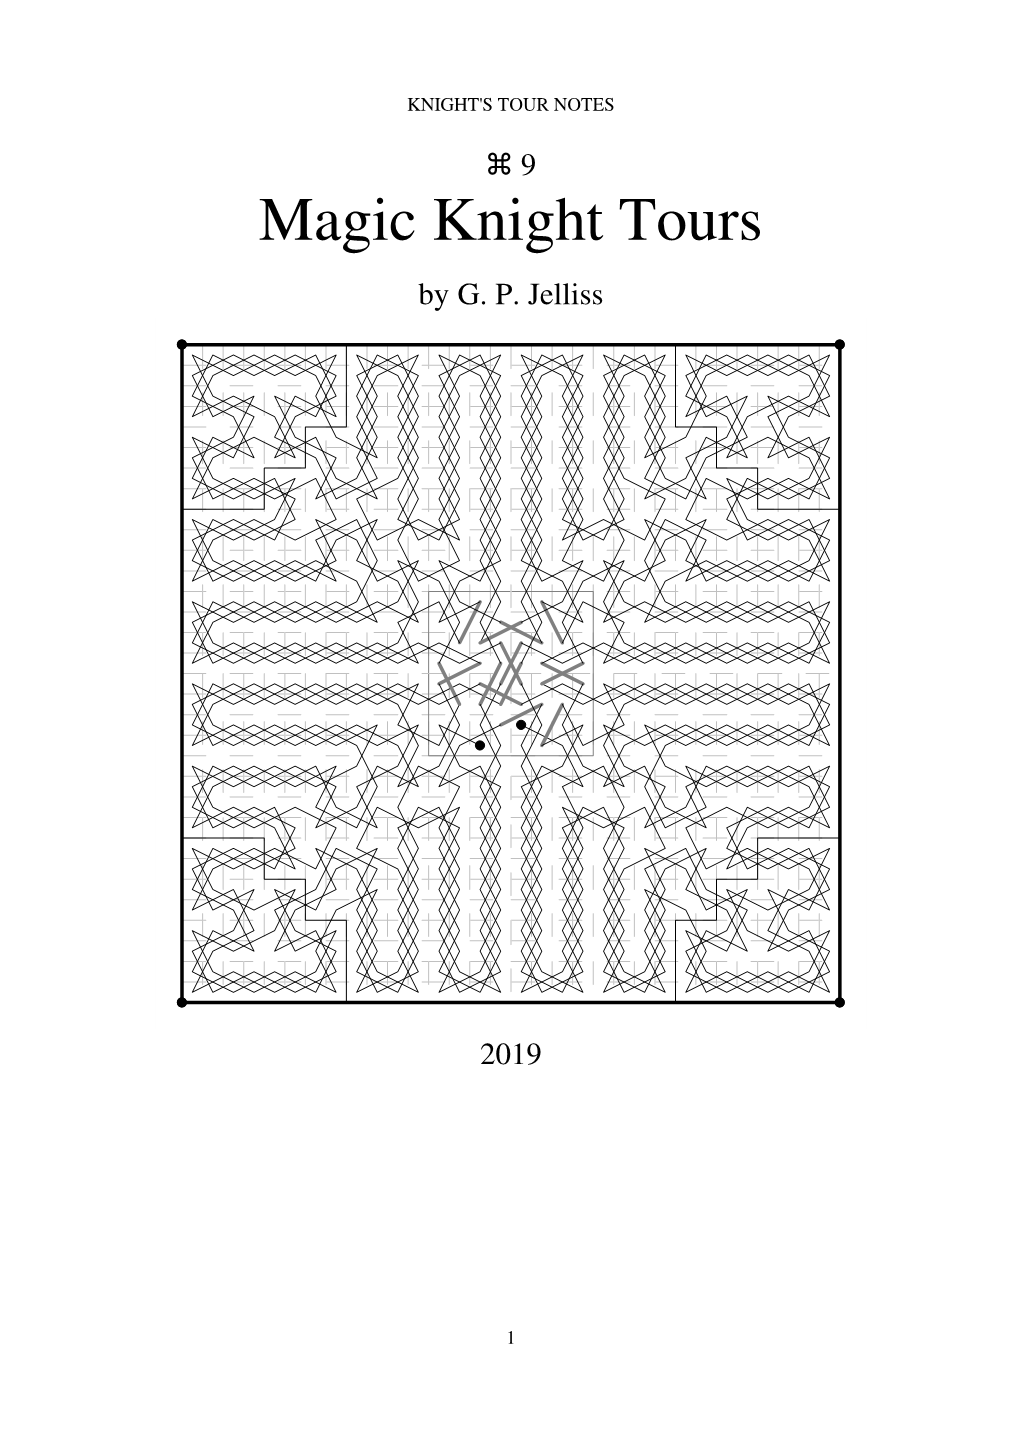 Magic Knight Tours by G